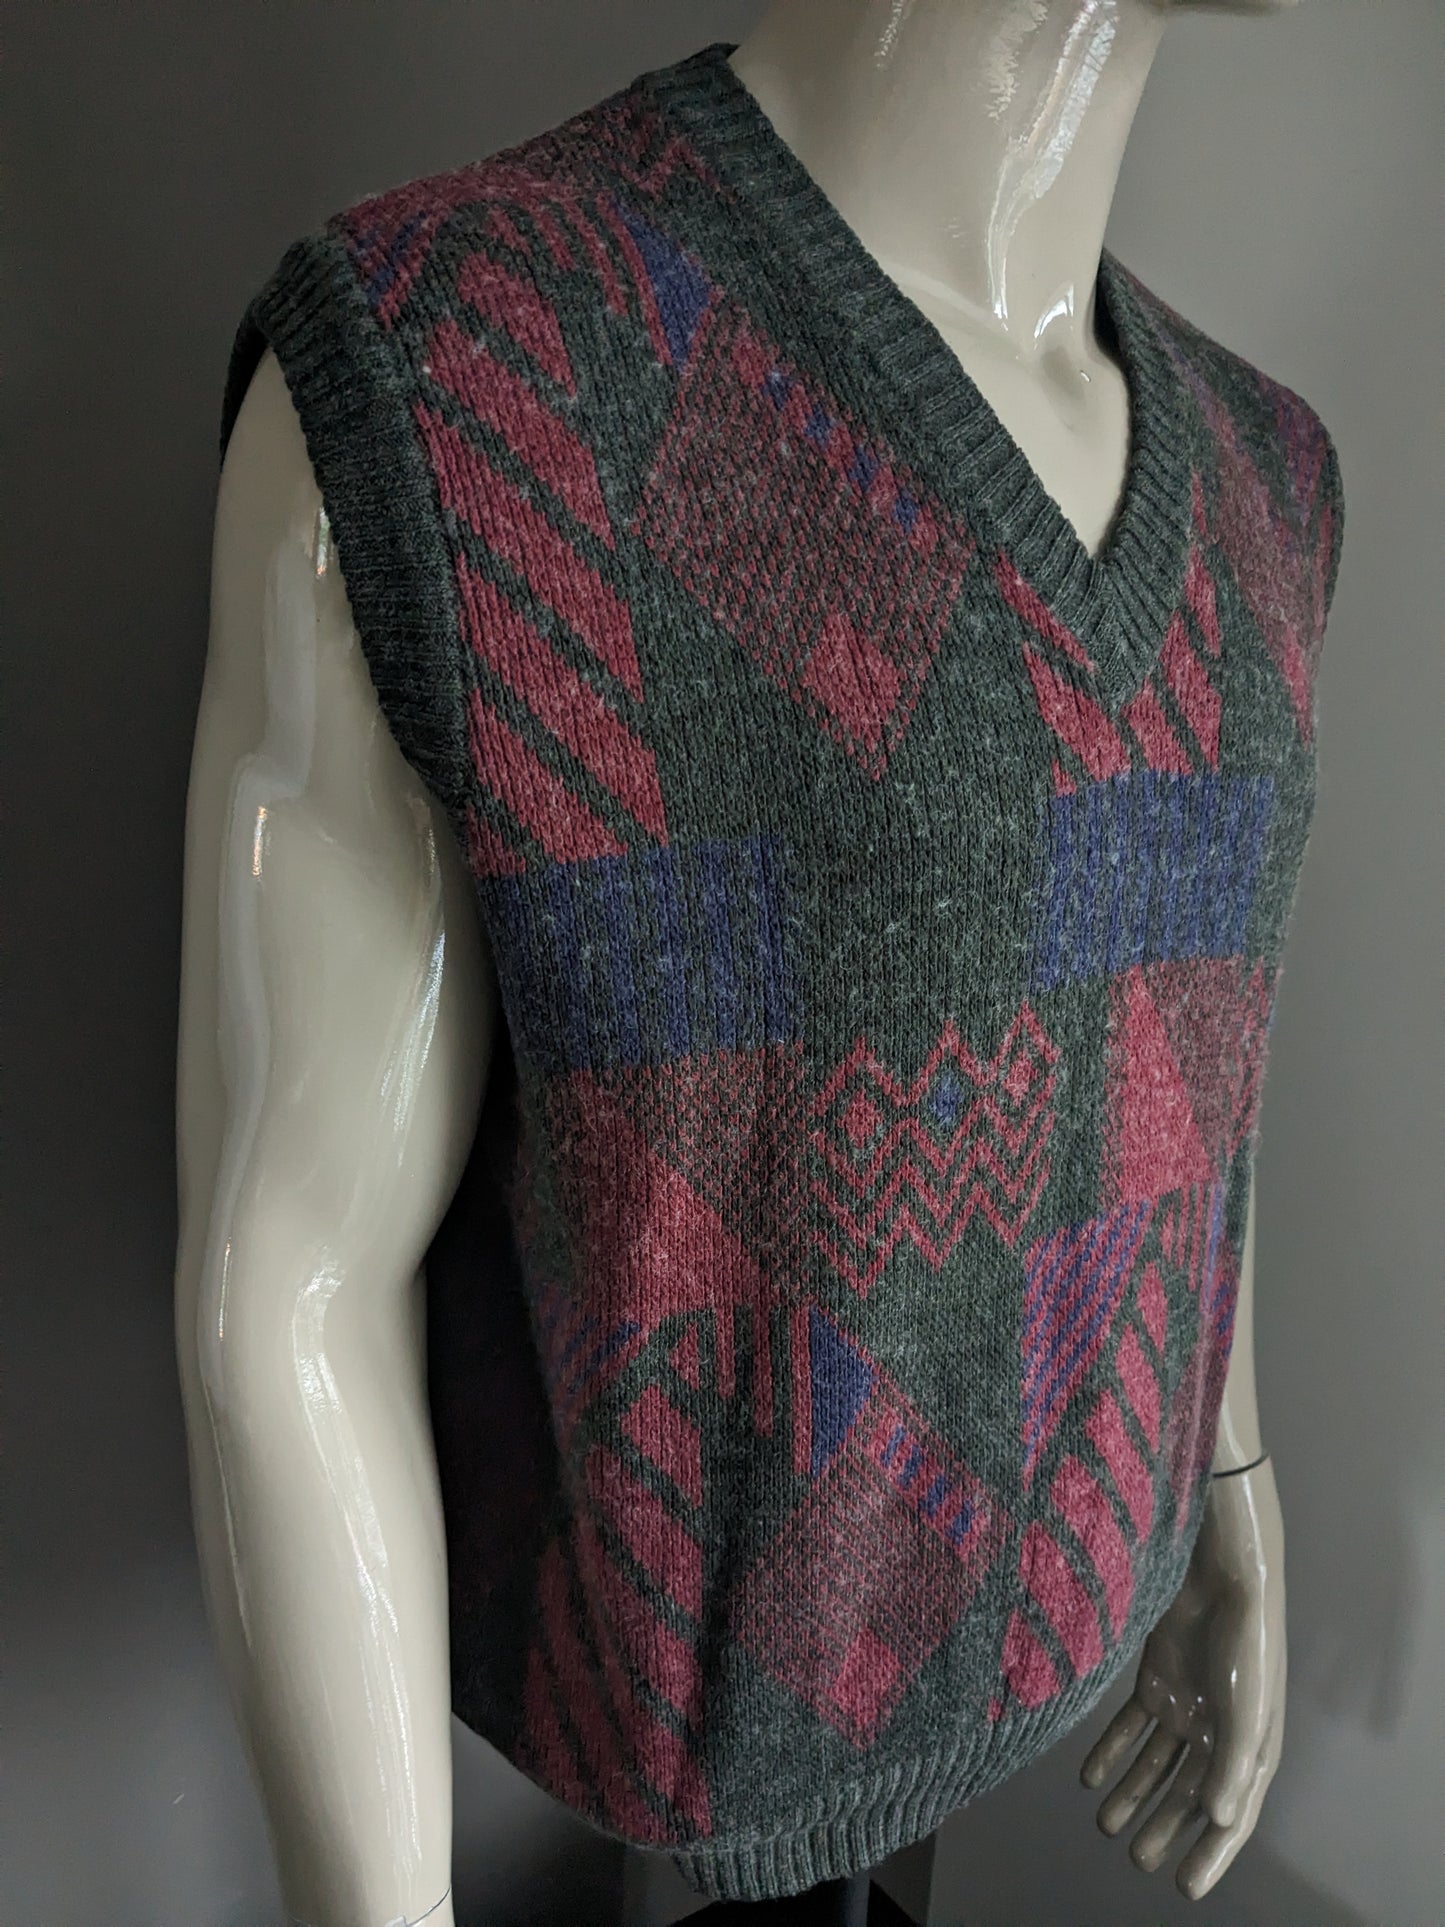 Vintage wool spencer. Gray red purple colored. Size XL. 30% wool.